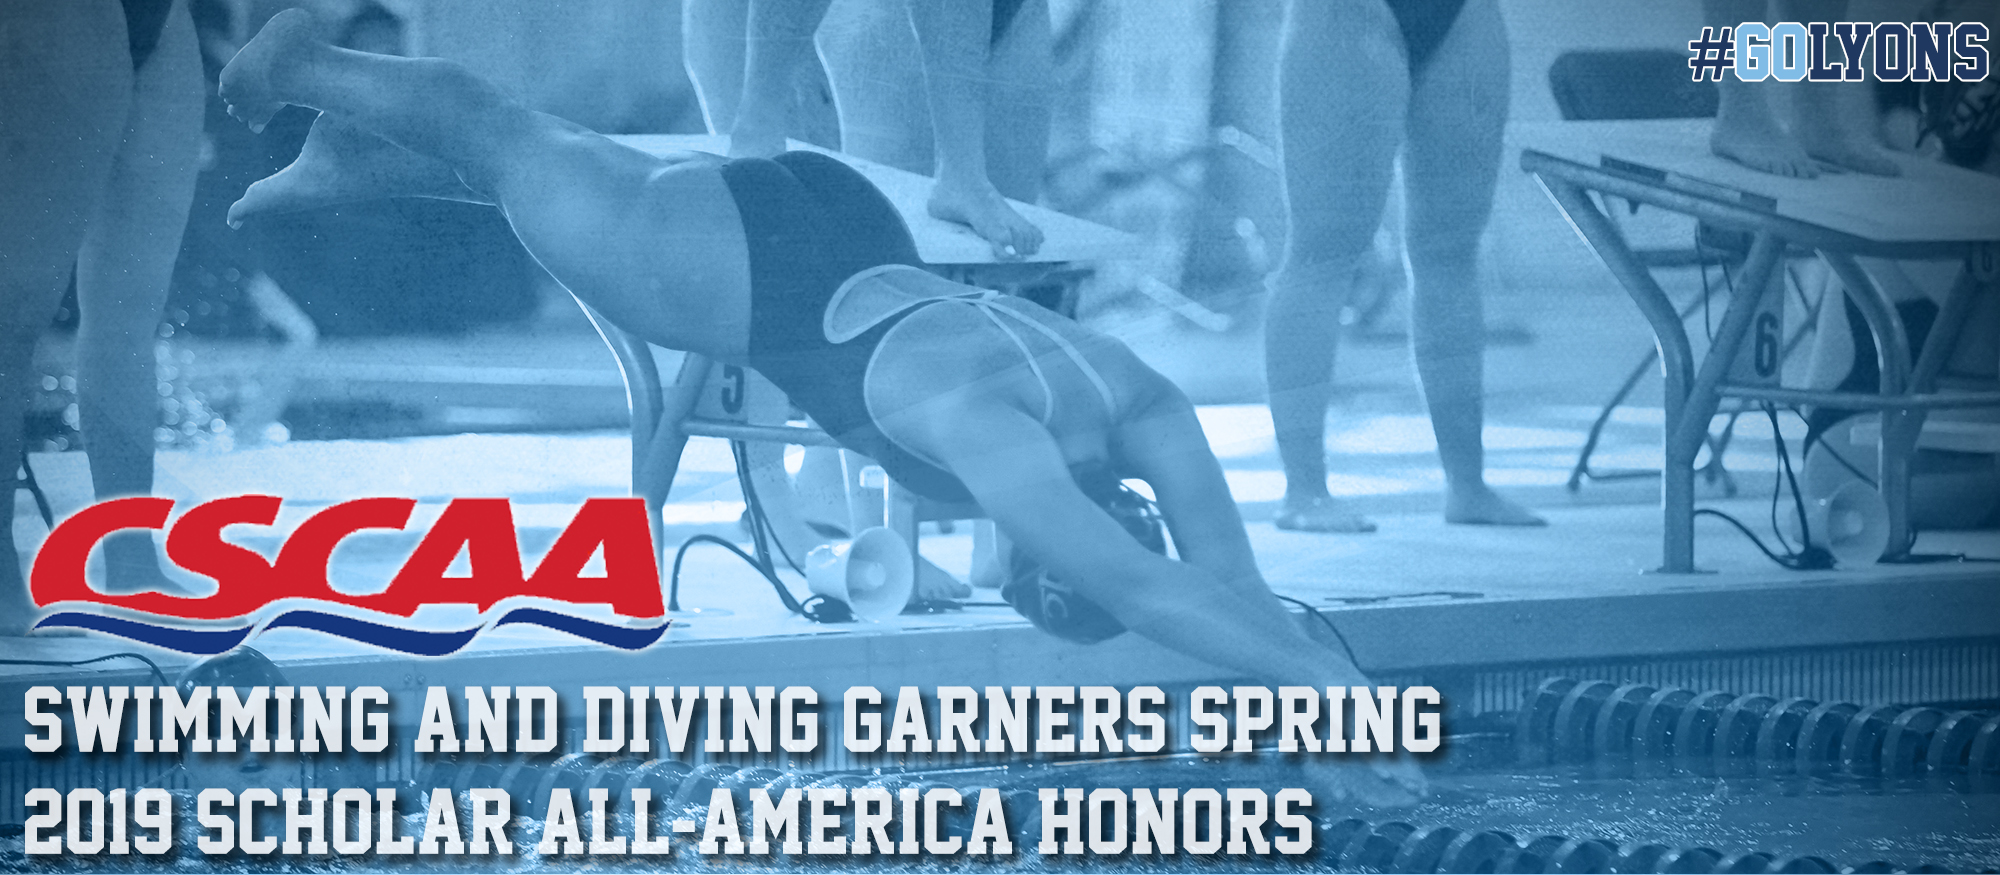 Image of a swimmer off the blocks. Full image promotes 2019 CSCAA Scholar All-America honors for the Lyons Swimming & Diving Team.